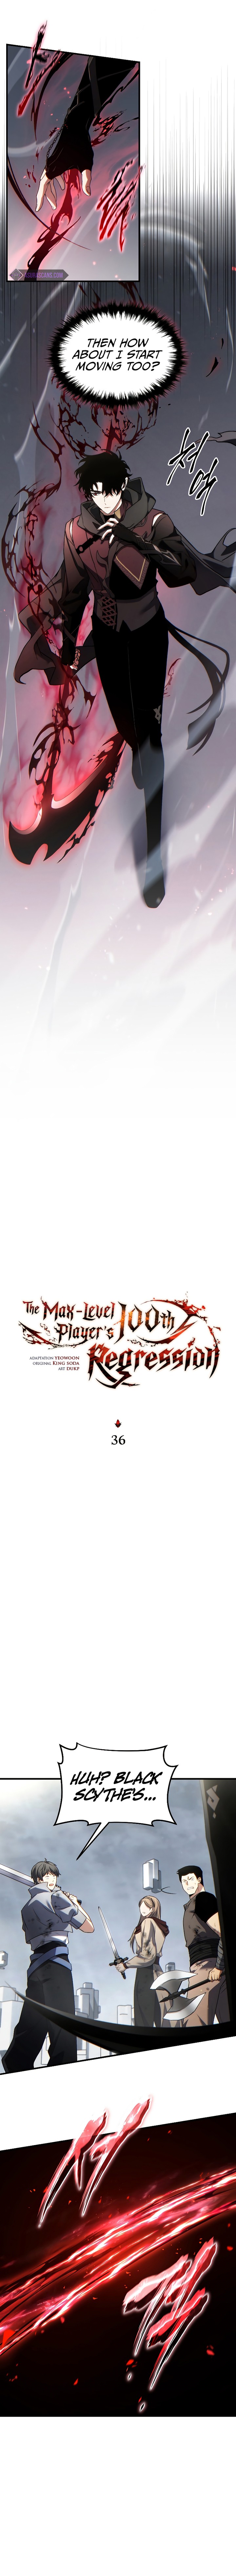 the_max_level_players_100th_regression_36_8